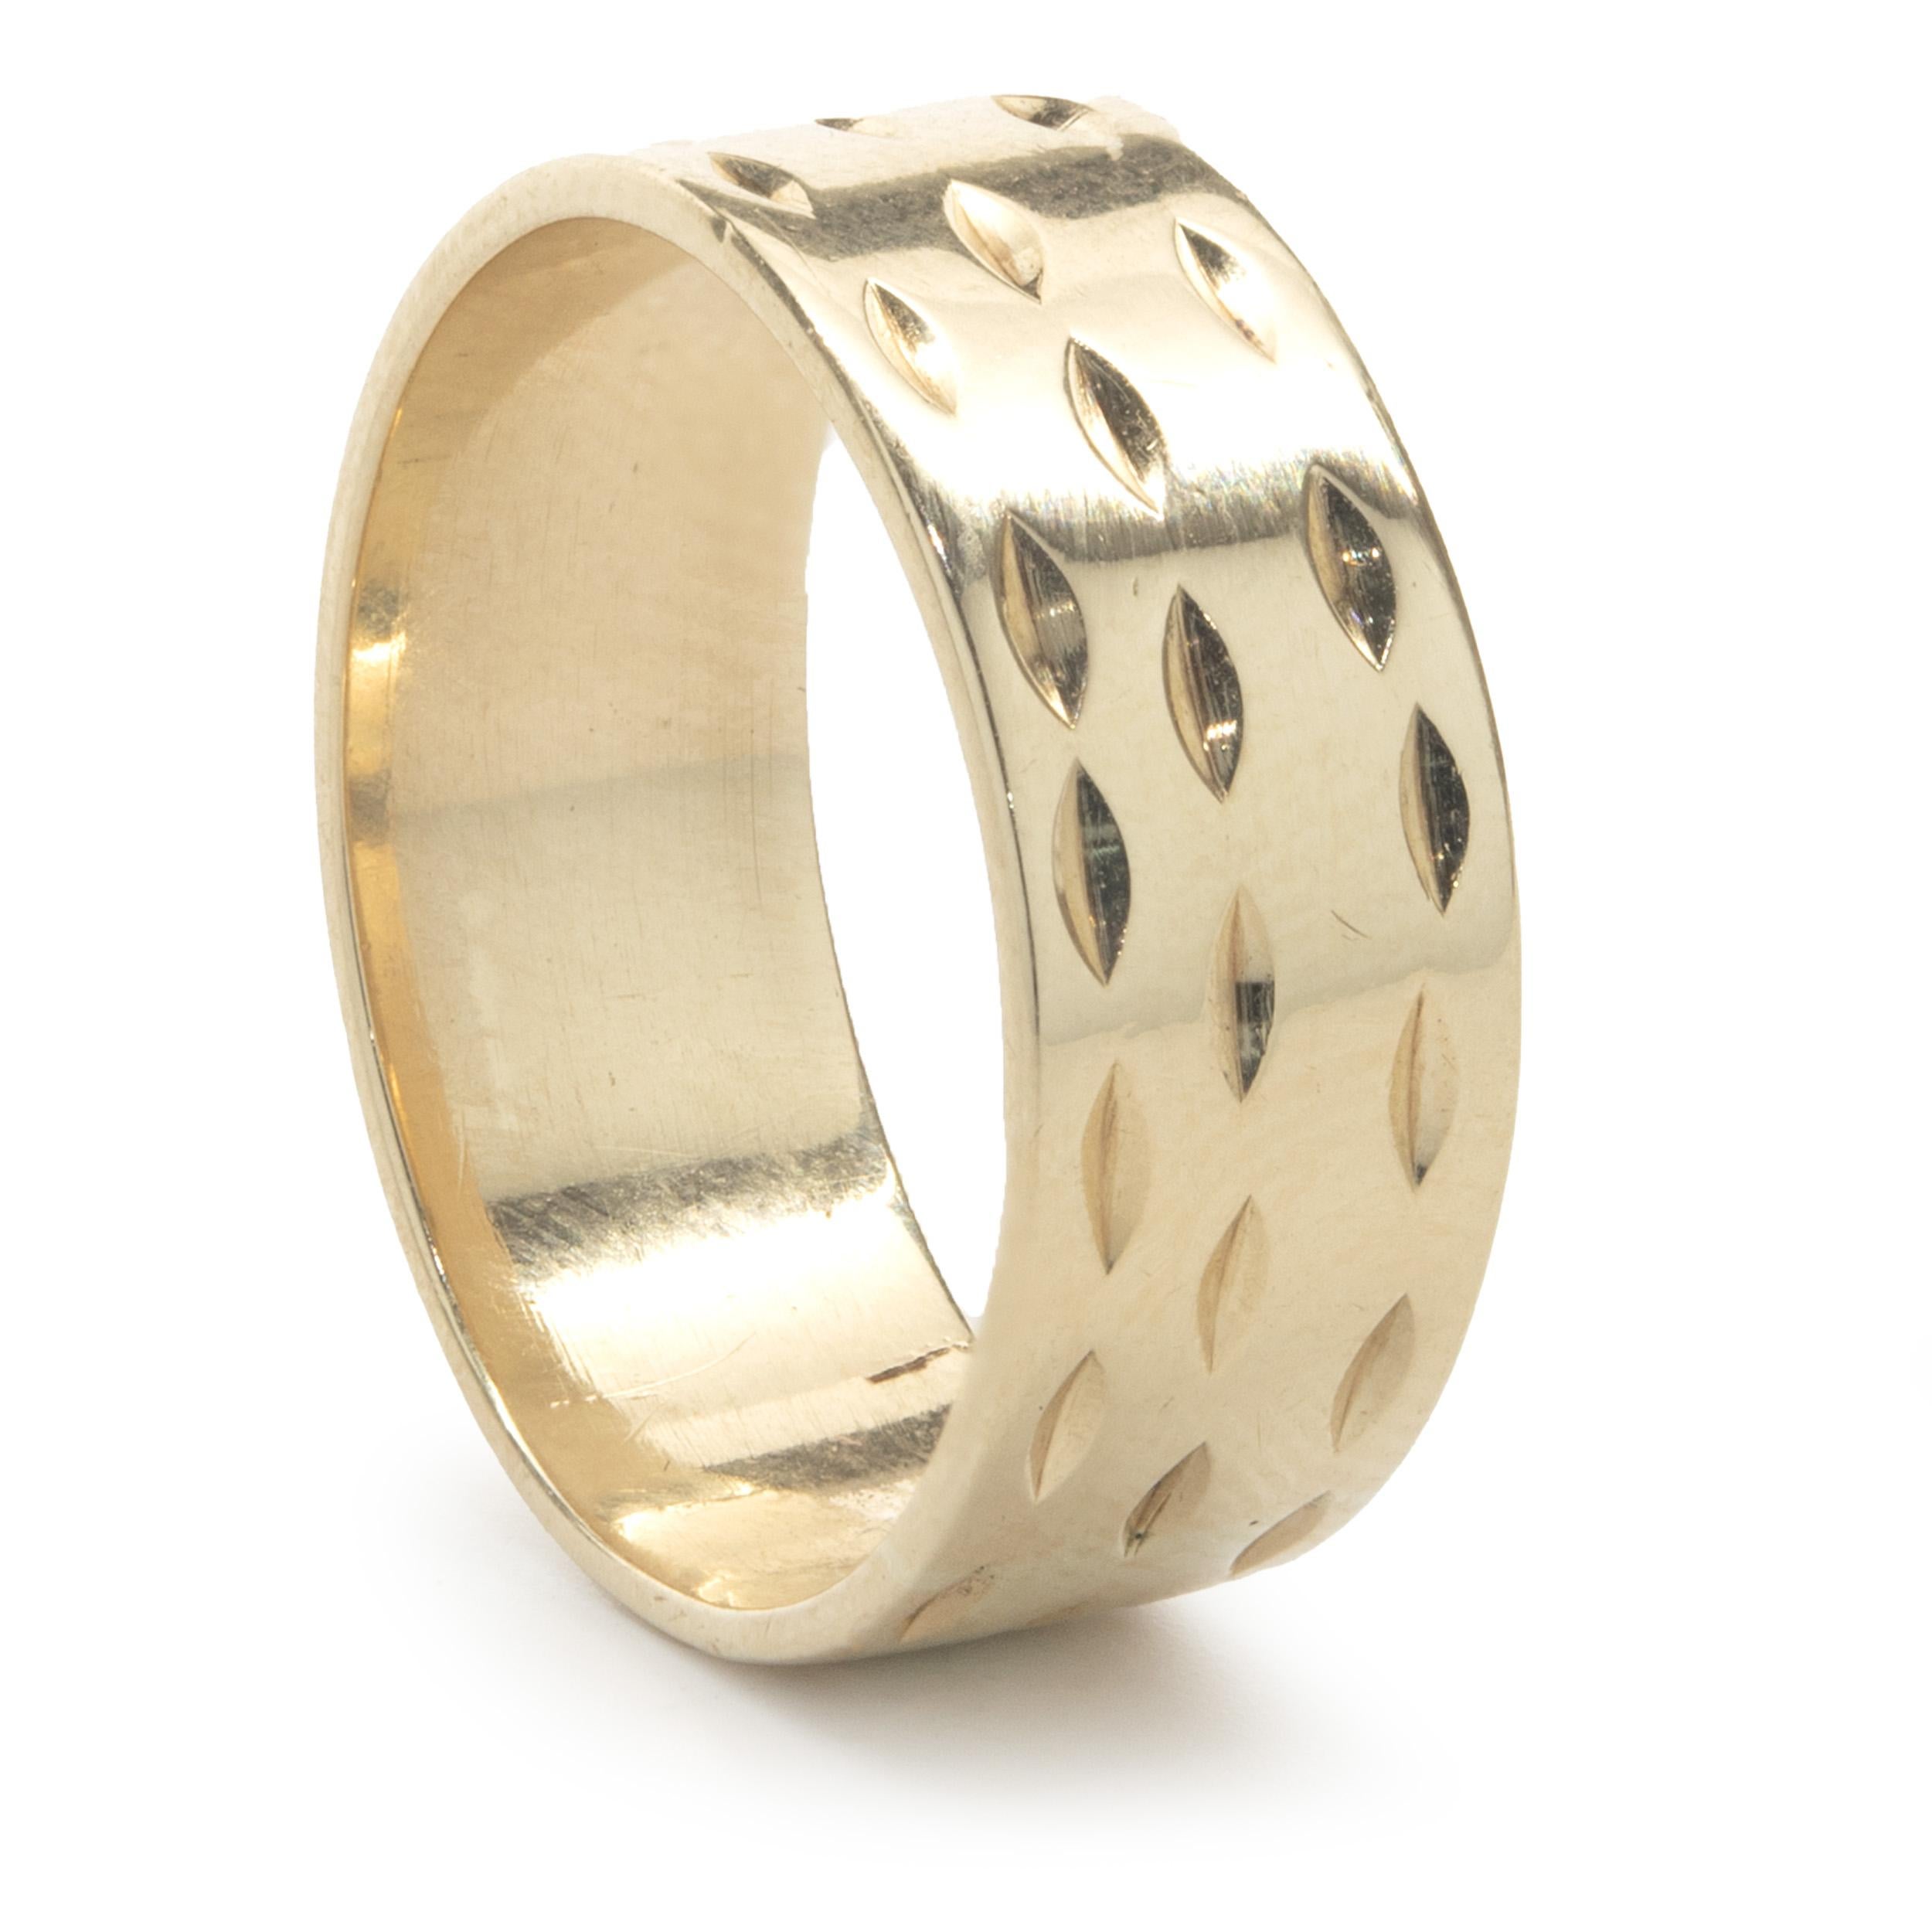 Designer: custom
Material: 14K yellow gold
Dimensions: the ring measures 8mm wide
Weight:  5.51 grams
Ring Size: 9 (Please allow up to 2 additional business days for sizing requests) 
